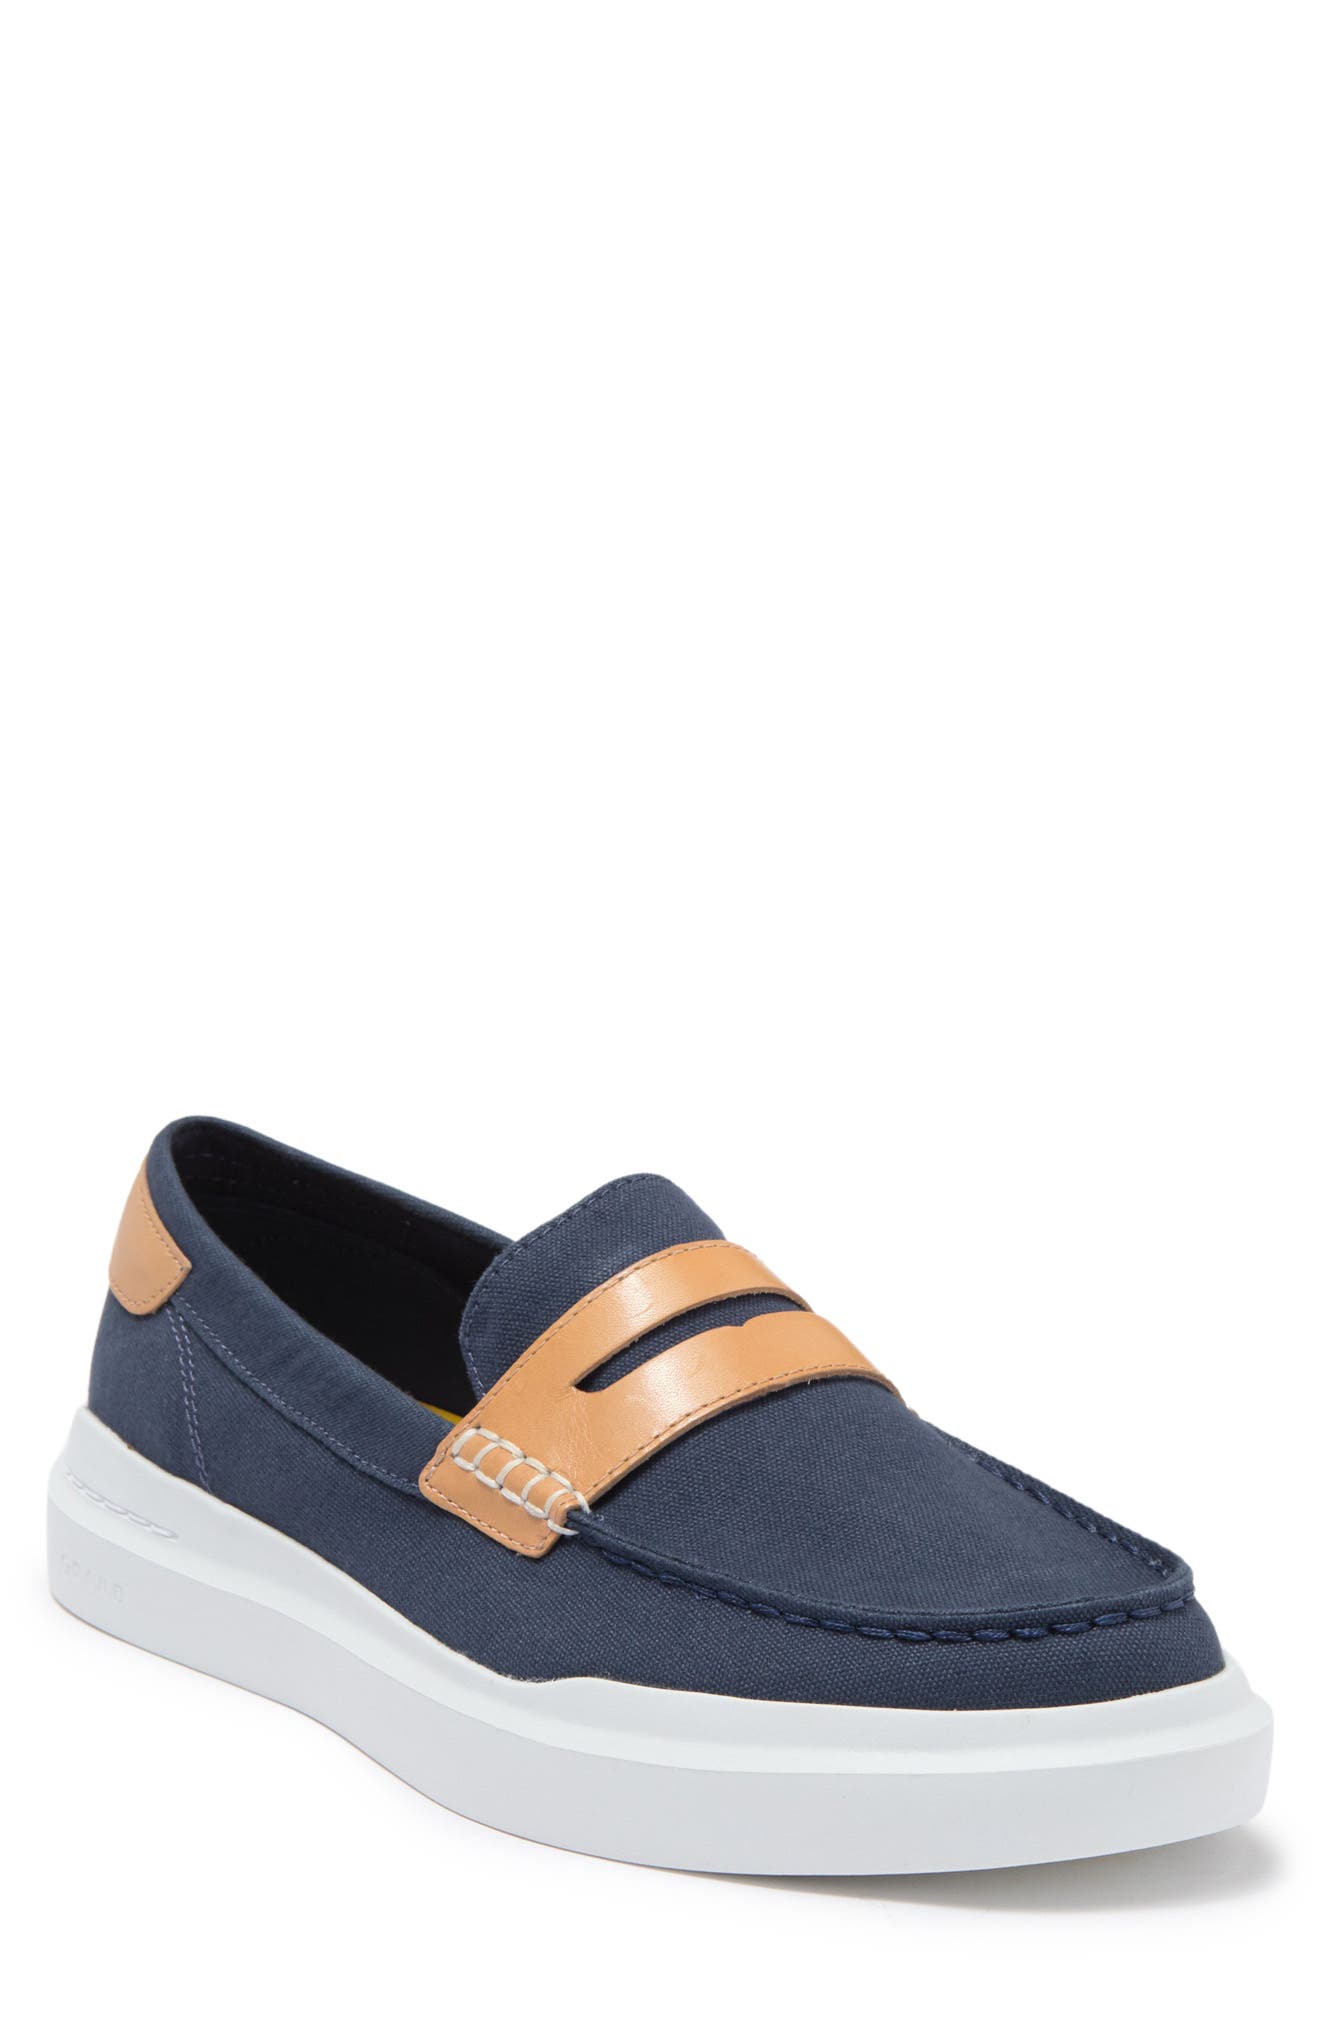 cole haan canvas loafers Off 69% - www.gmcanantnag.net